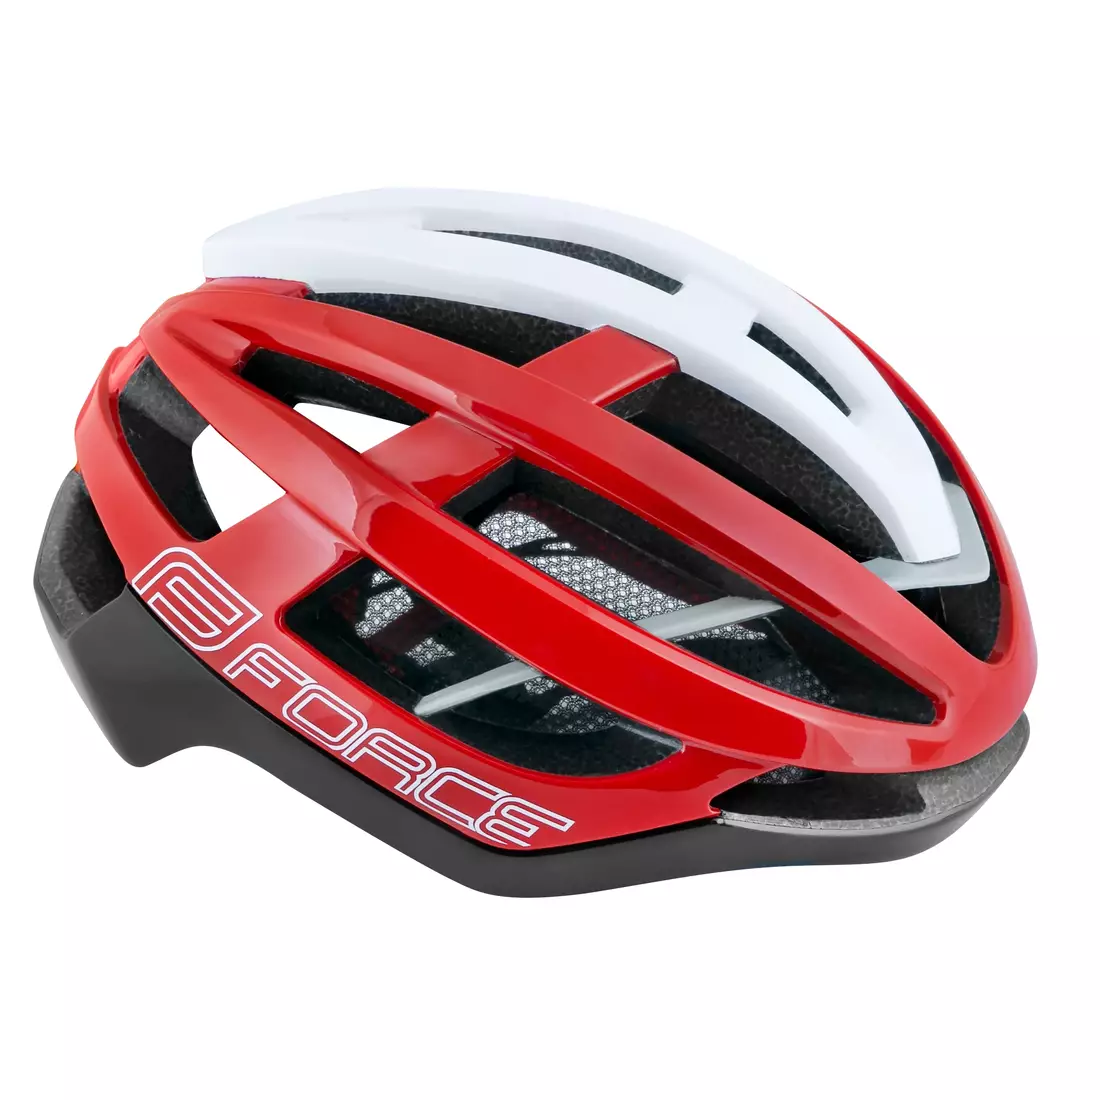 FORCE LYNX Bicycle helmet white/red